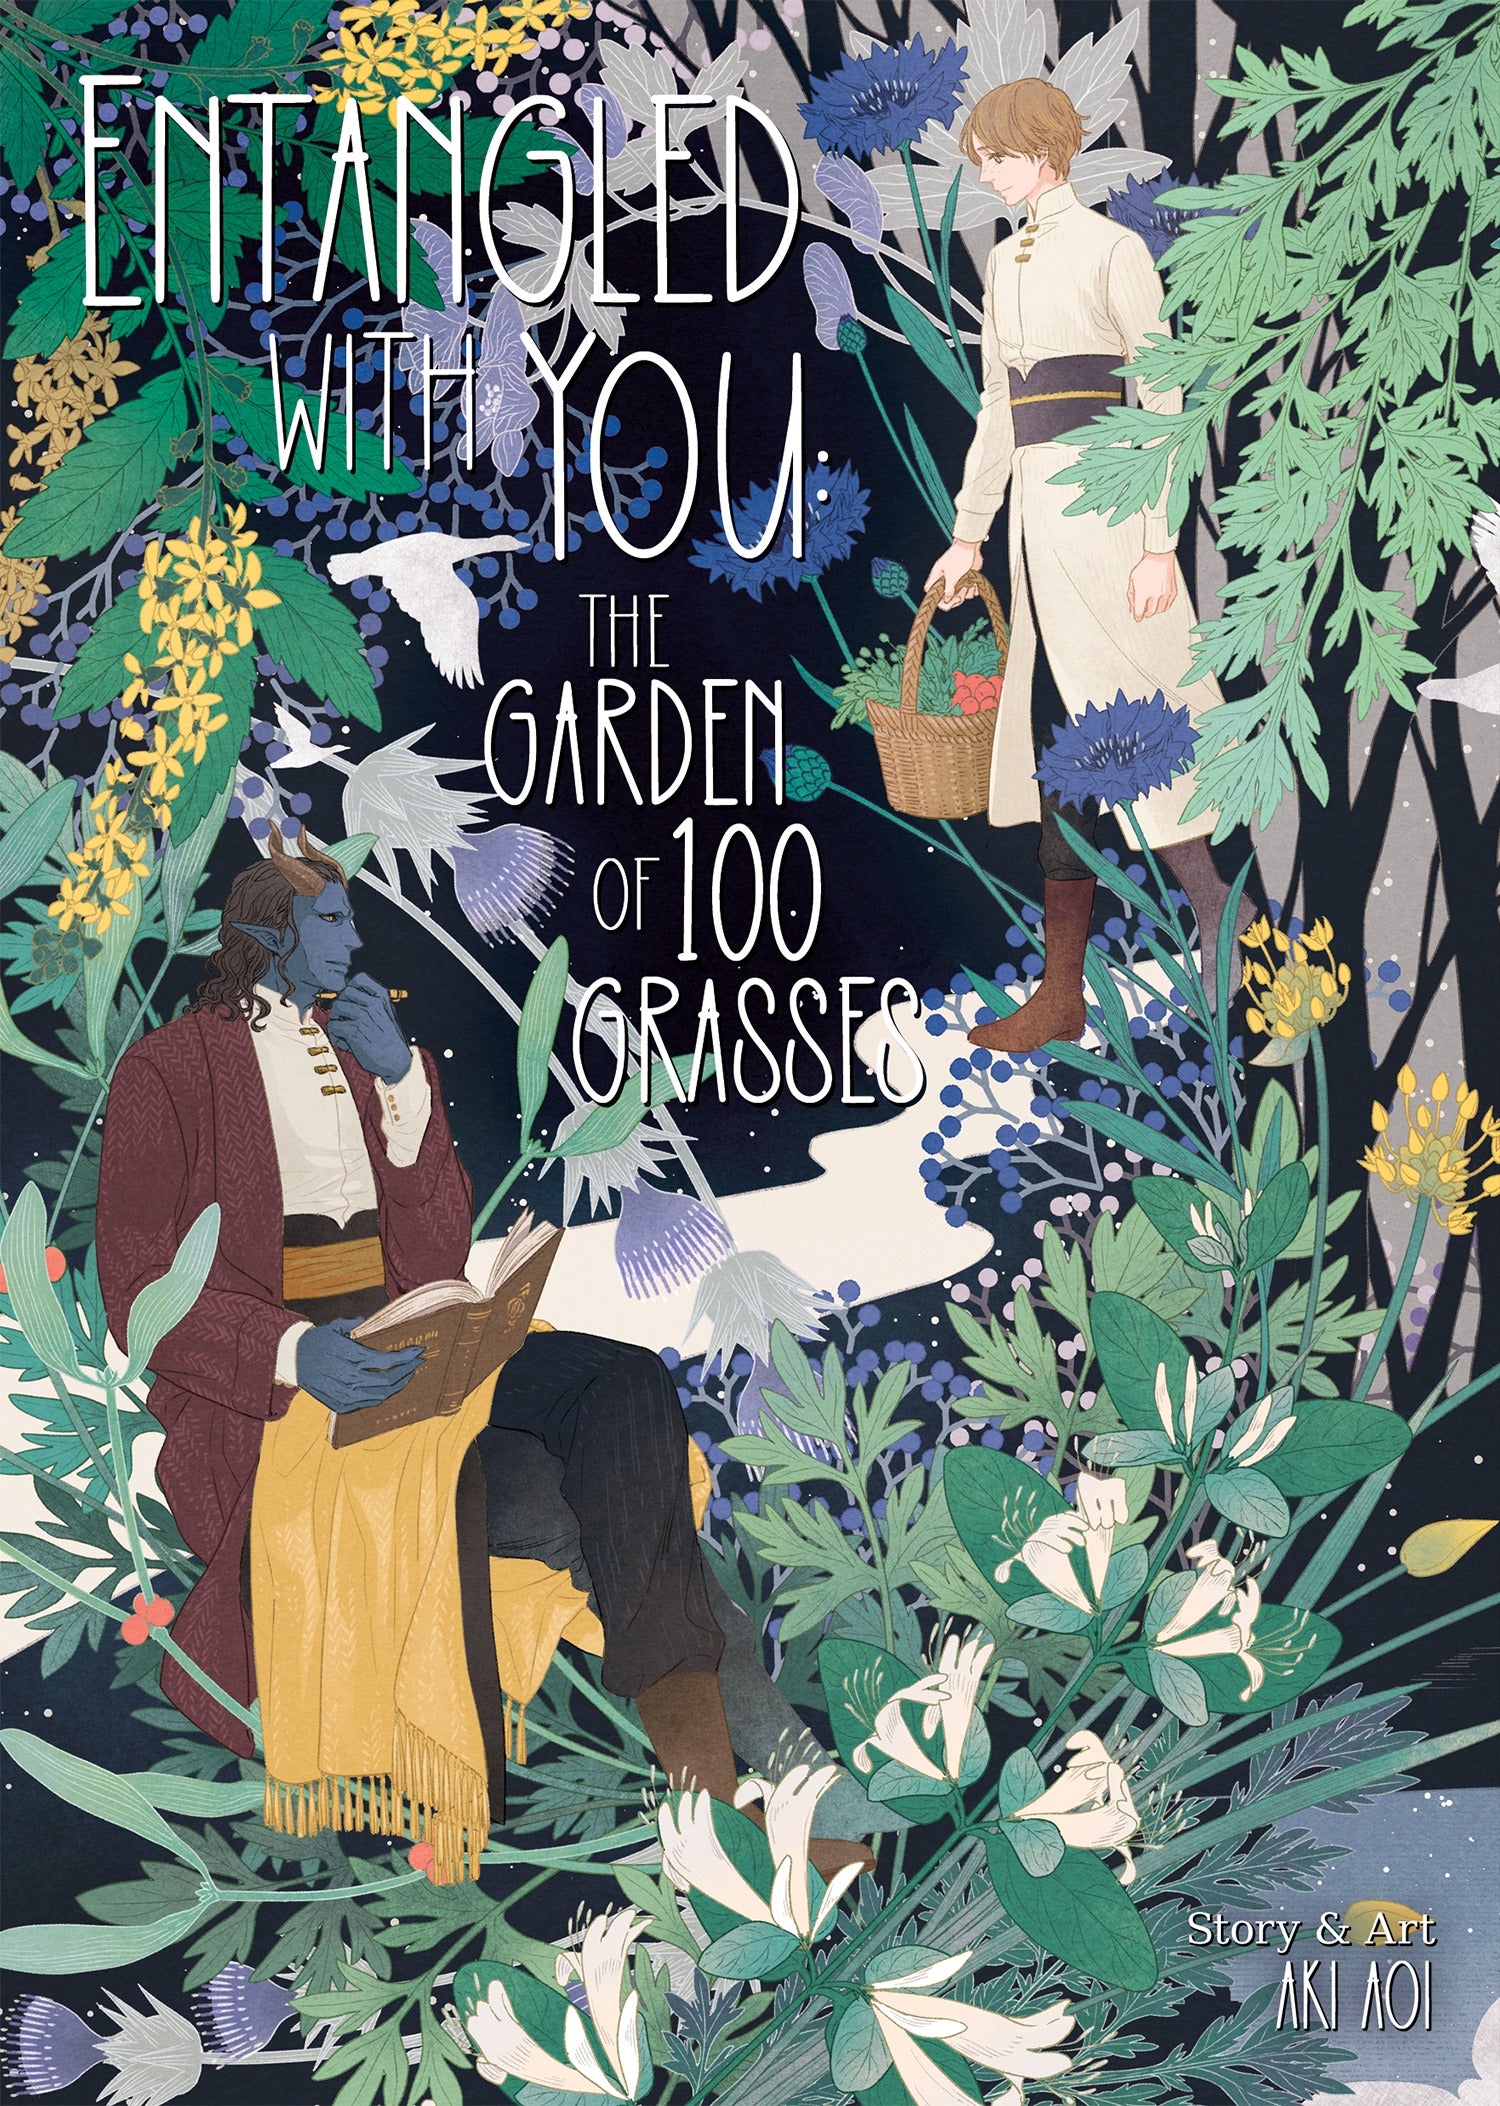 Entangled with You The Garden of 100 Grasses